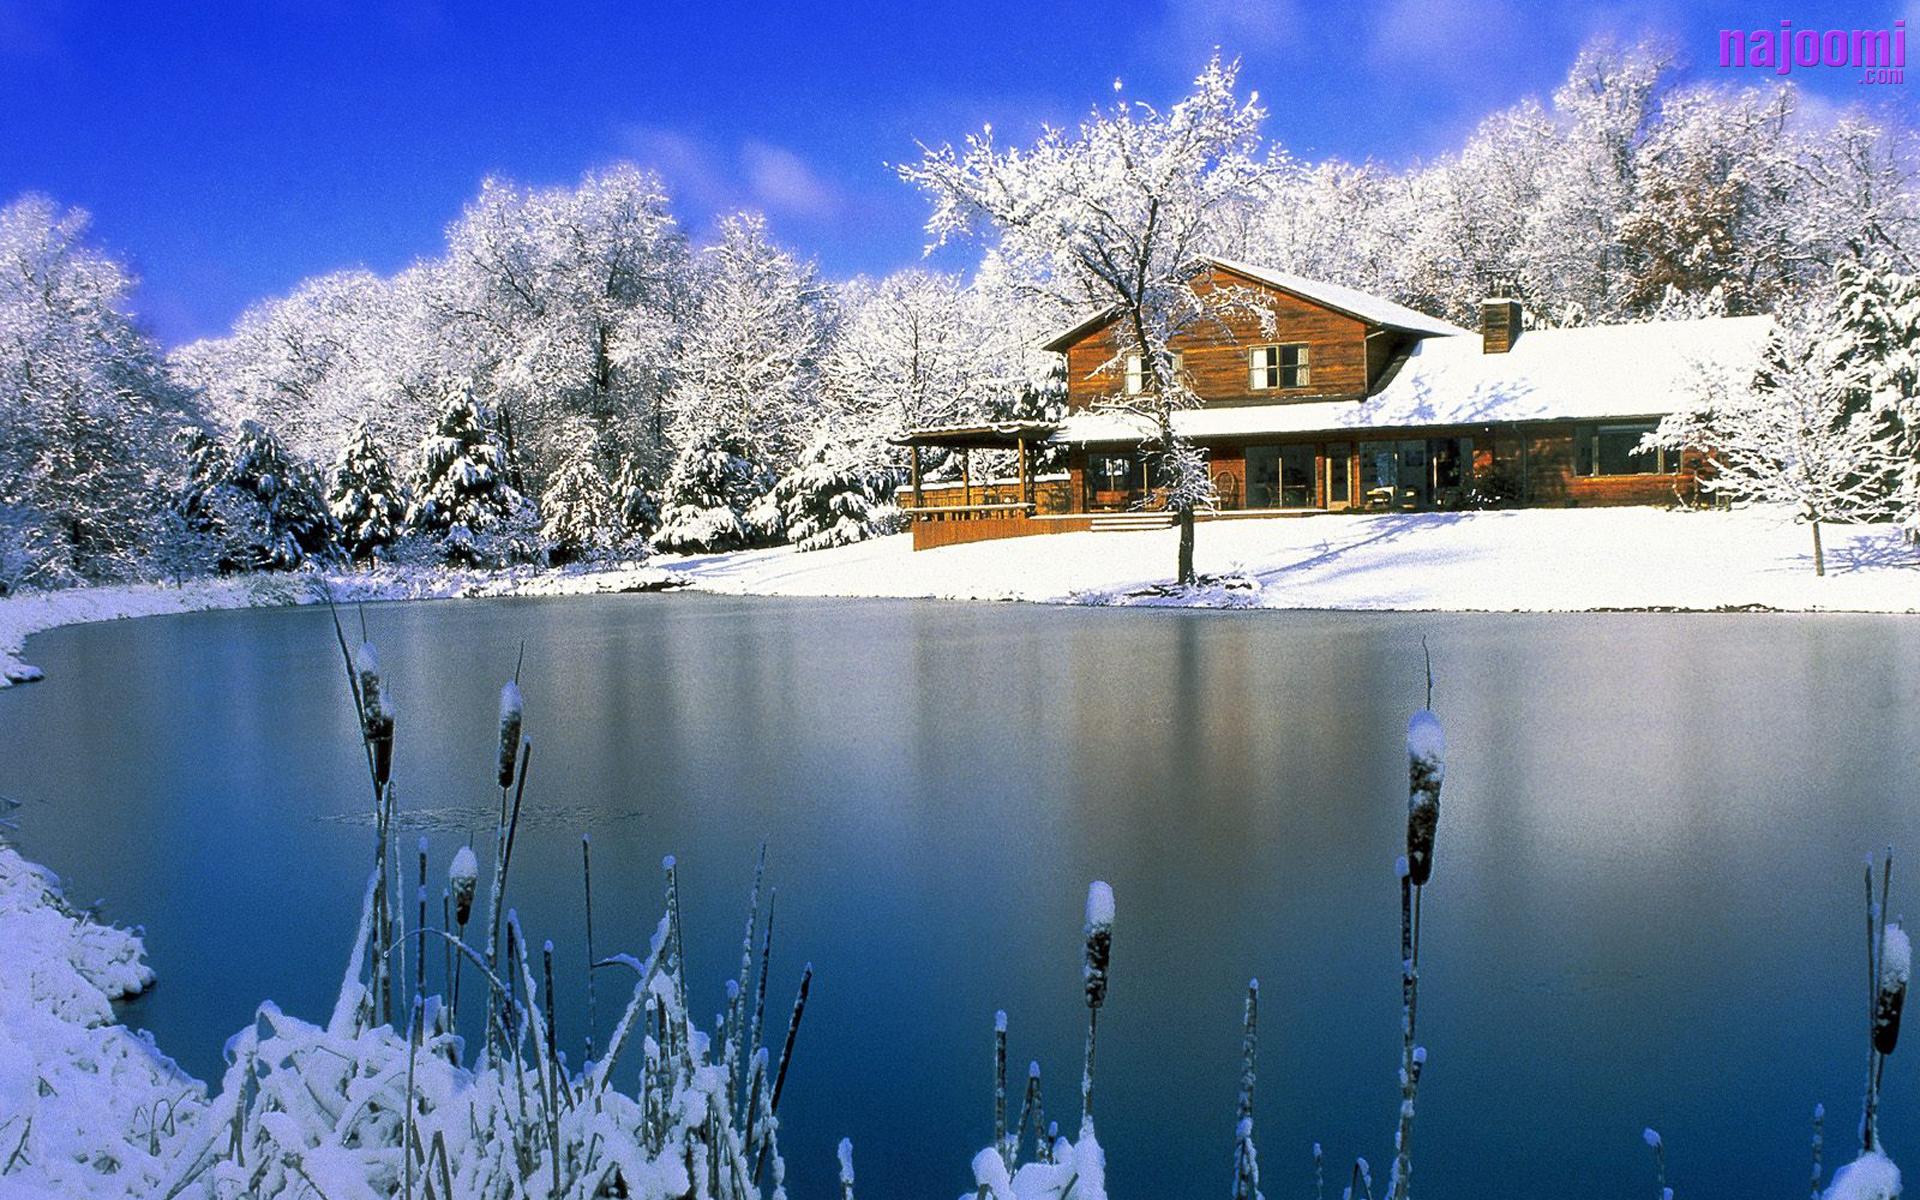 beautiful snow scenery wallpaper - images - tbwnz.com